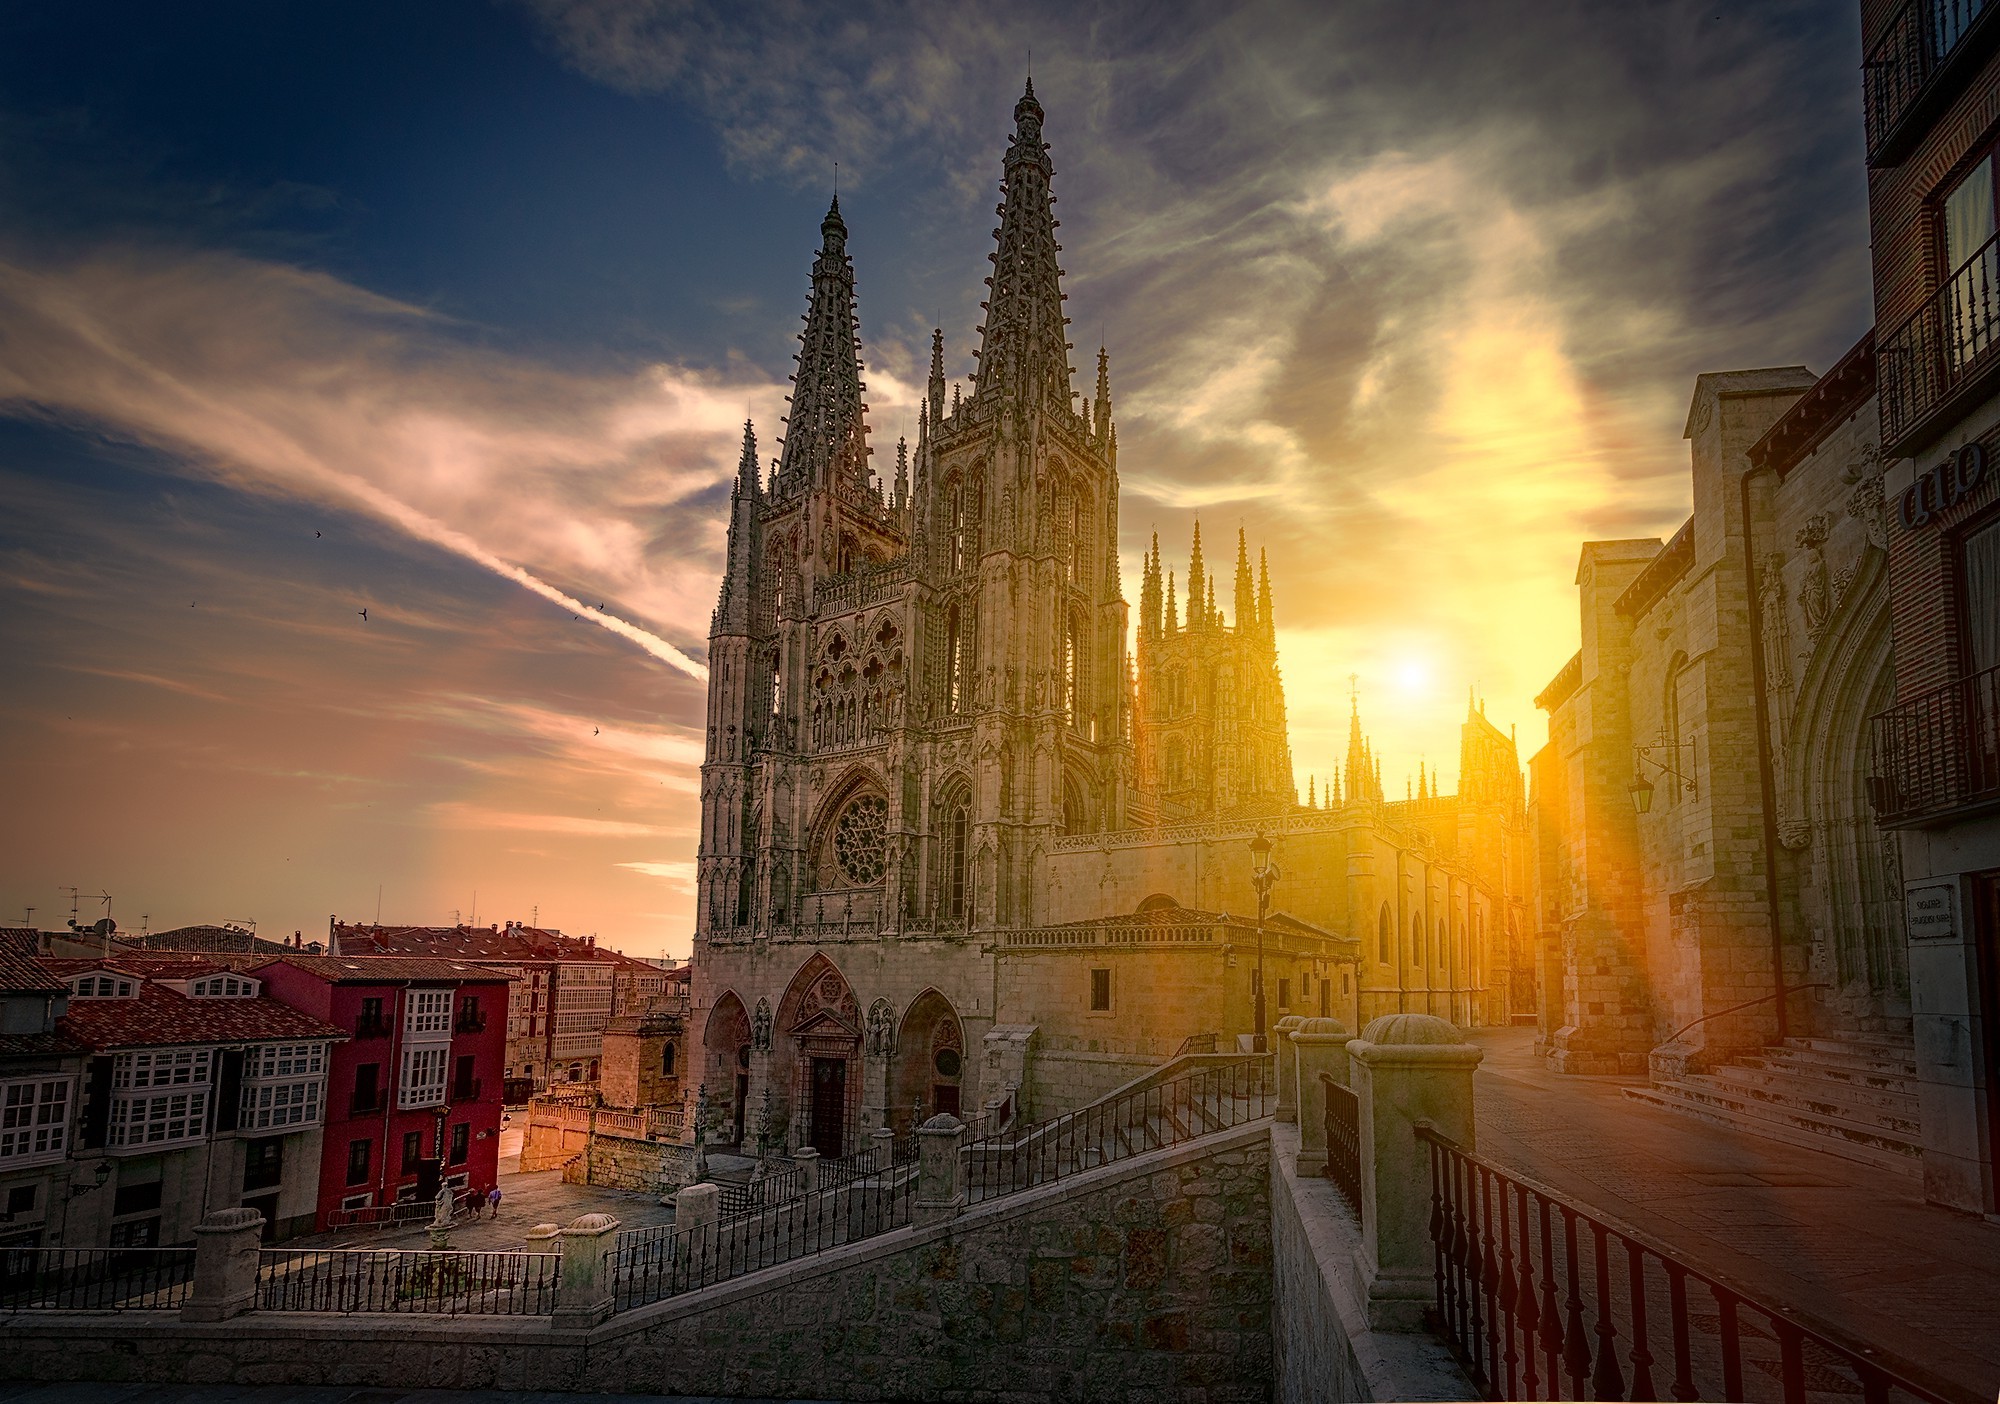 cityscape, Architecture, Town, Building, Burgos, Spain, Cathedral, House, Tower, Sun, Sunlight, Clouds Wallpaper